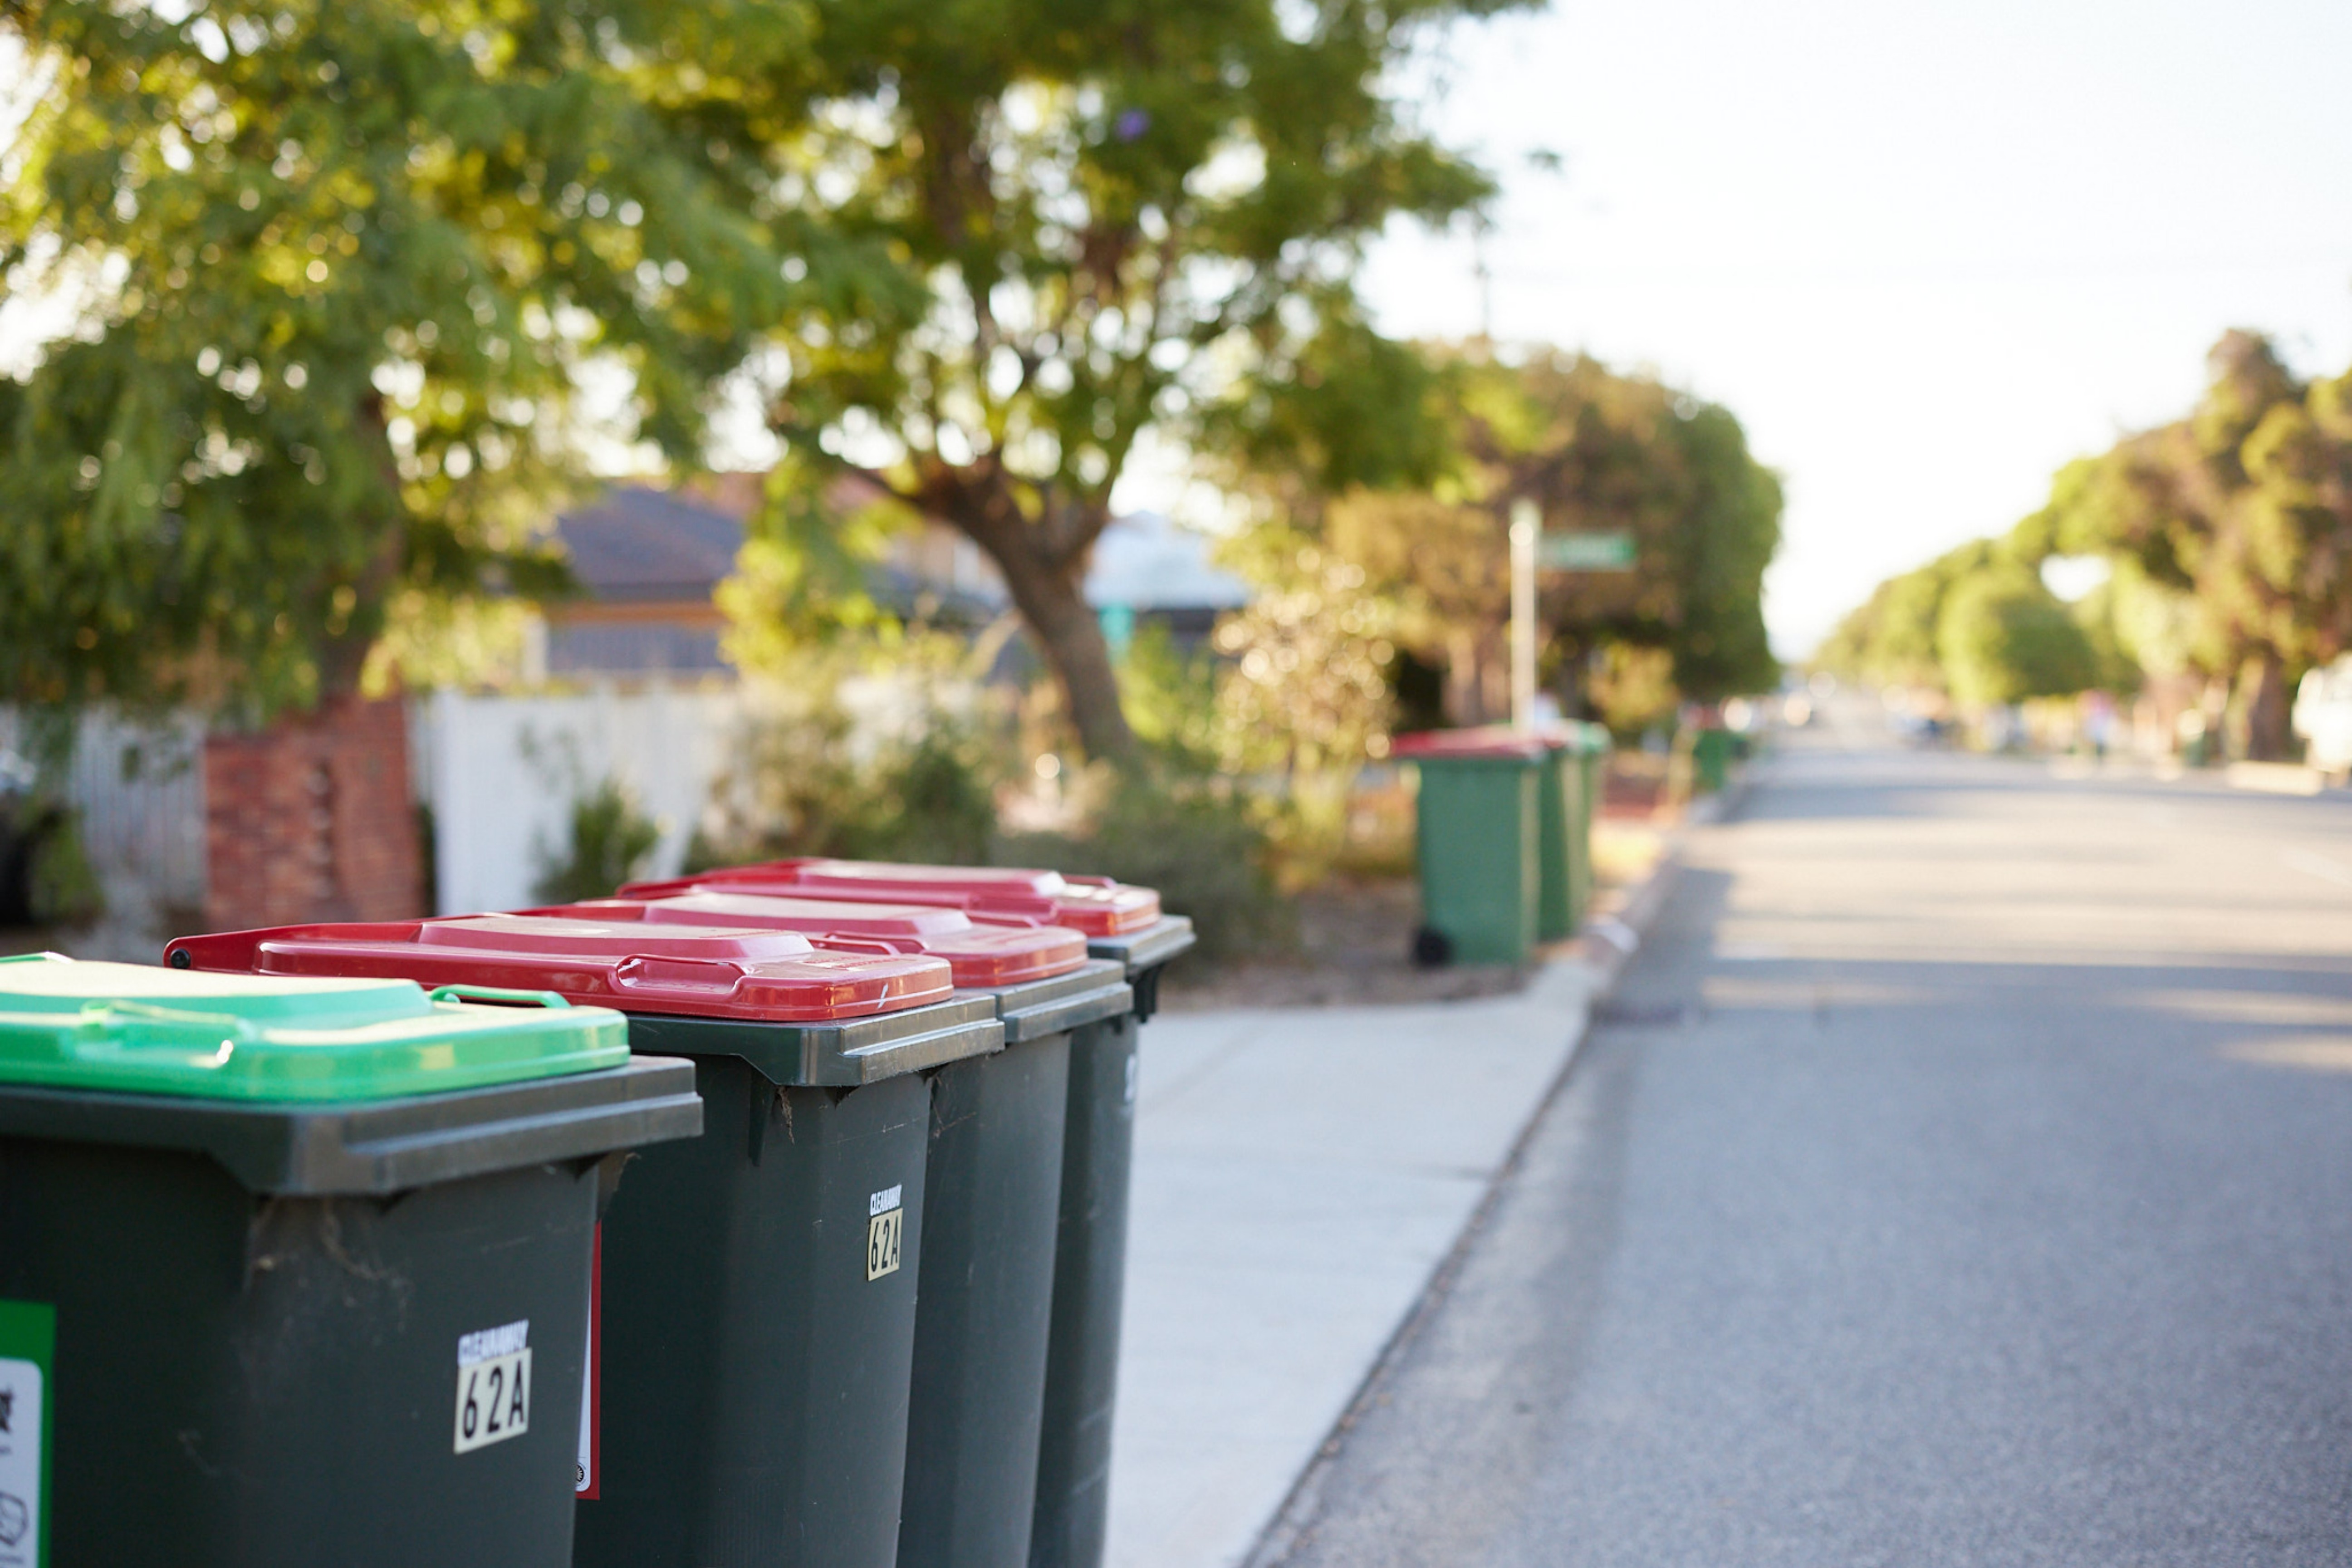 Waste collection update